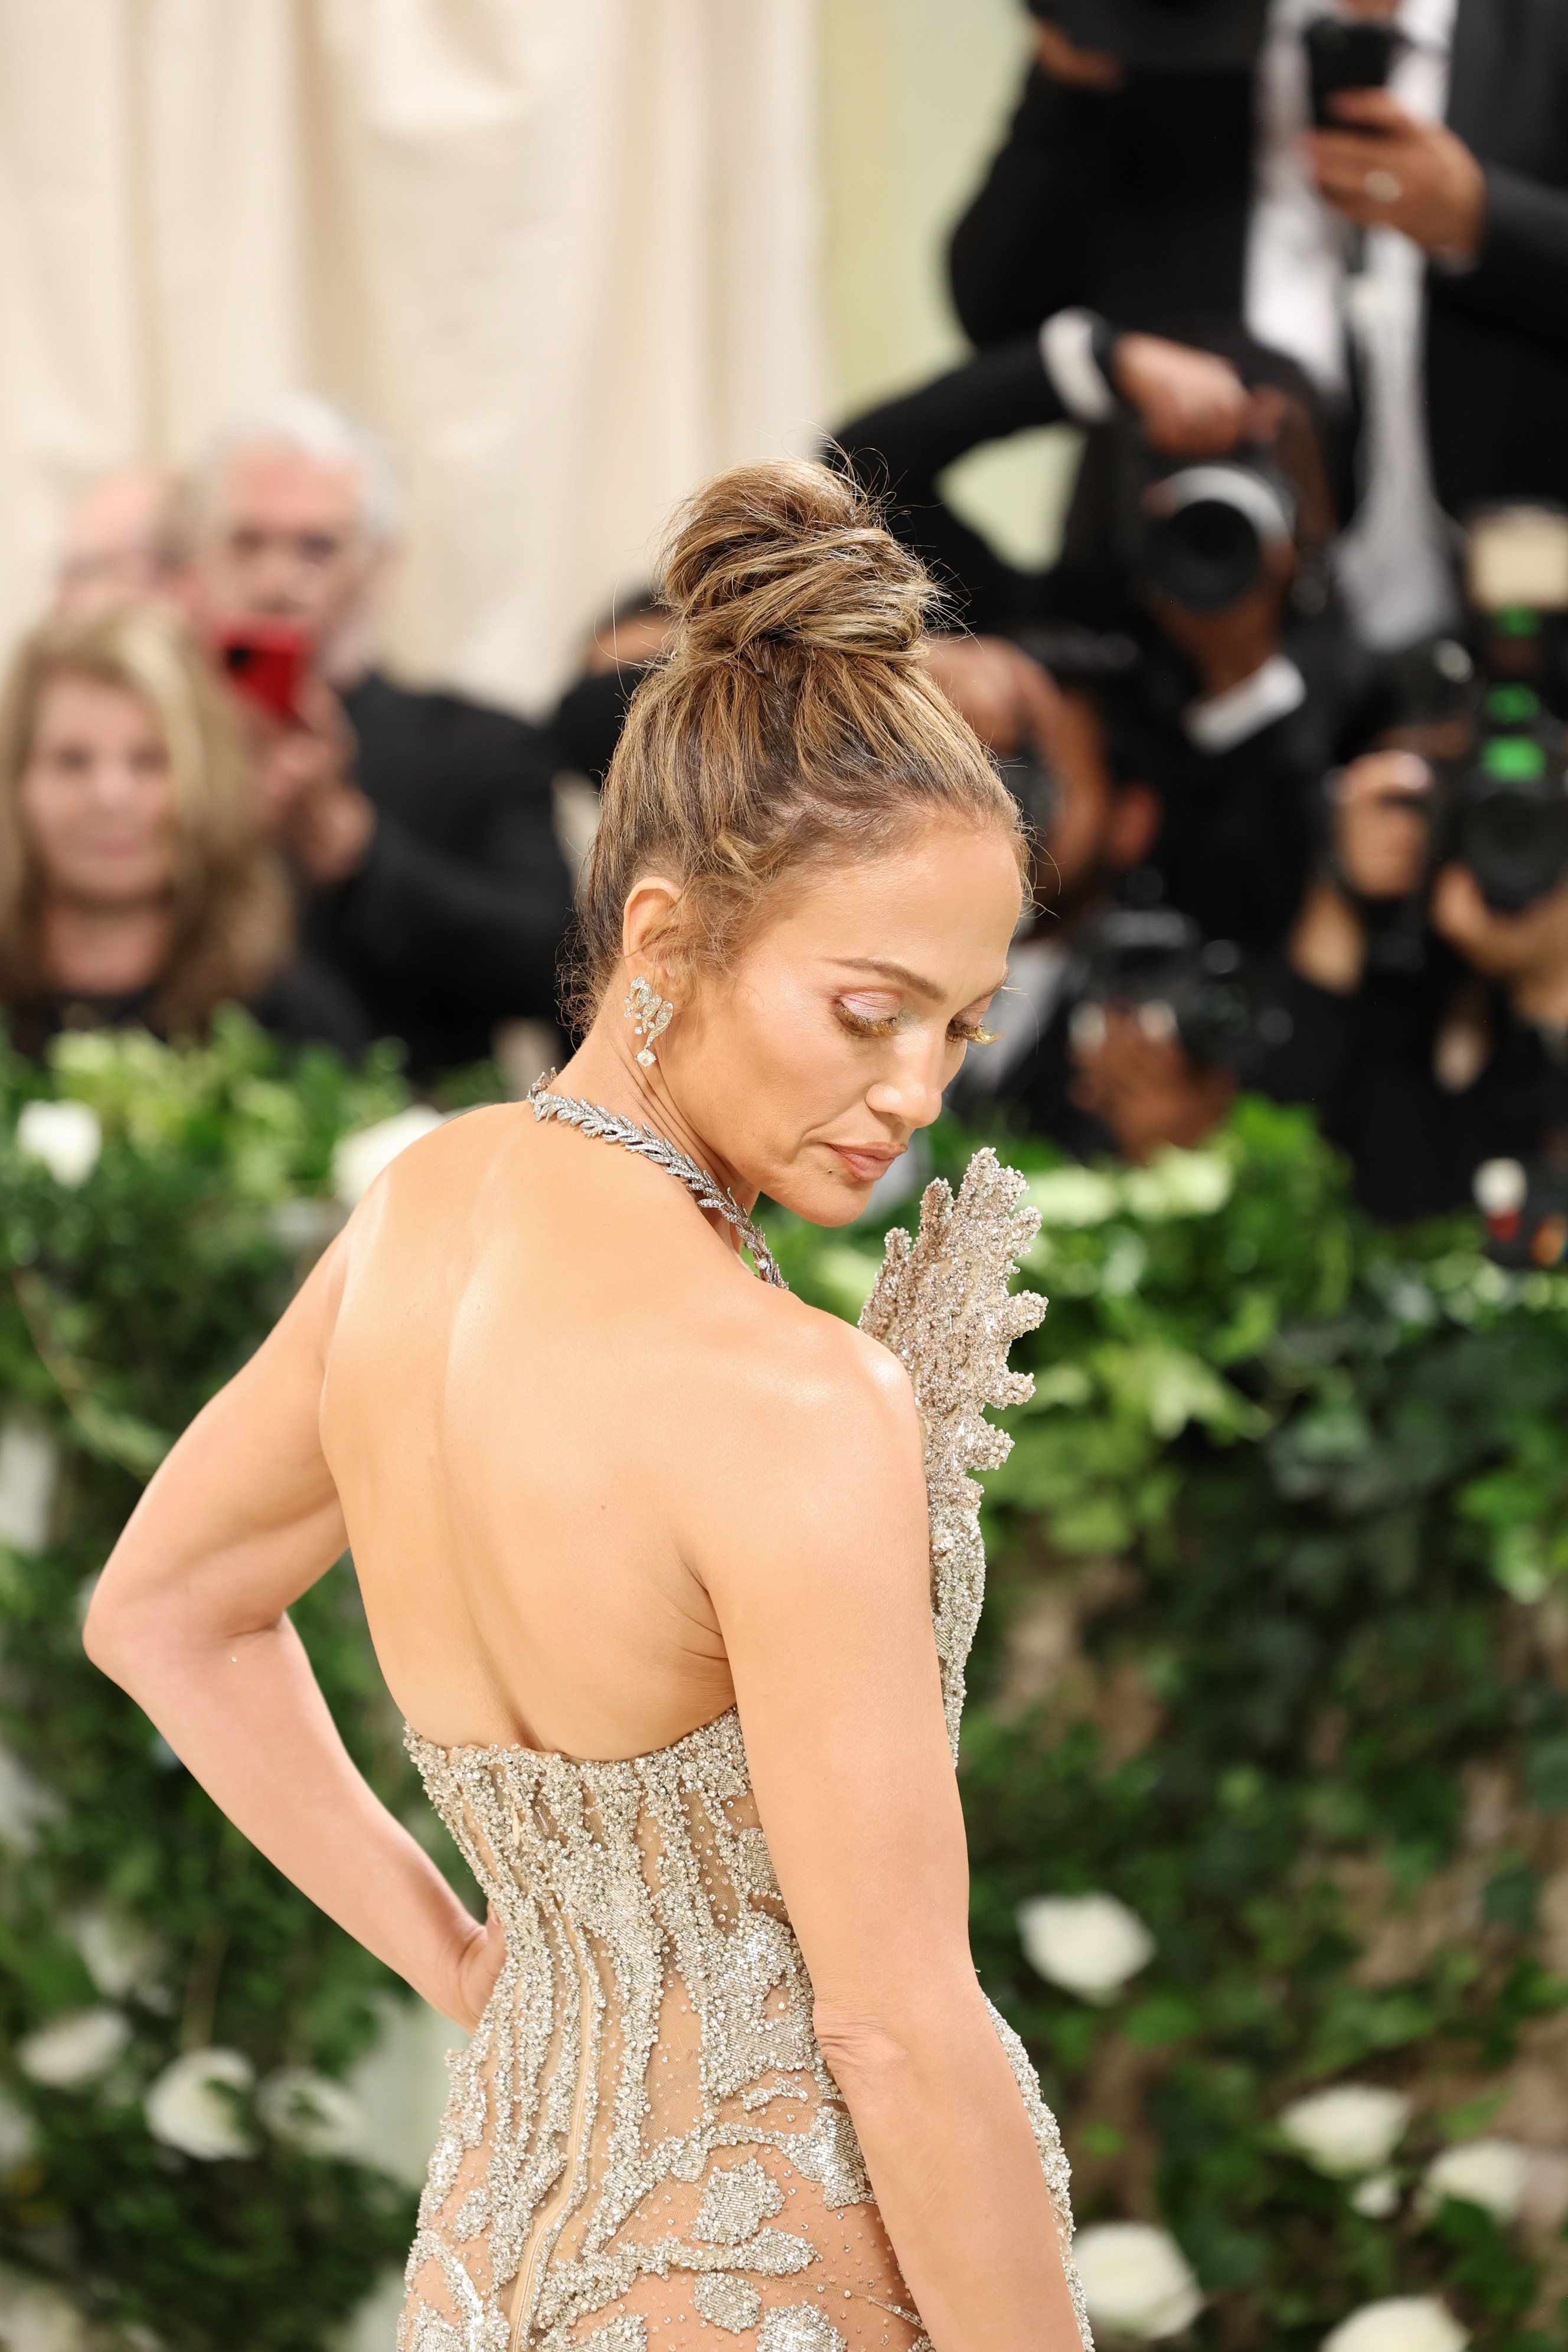 lea michele, jlo, and others arrive at the met gala